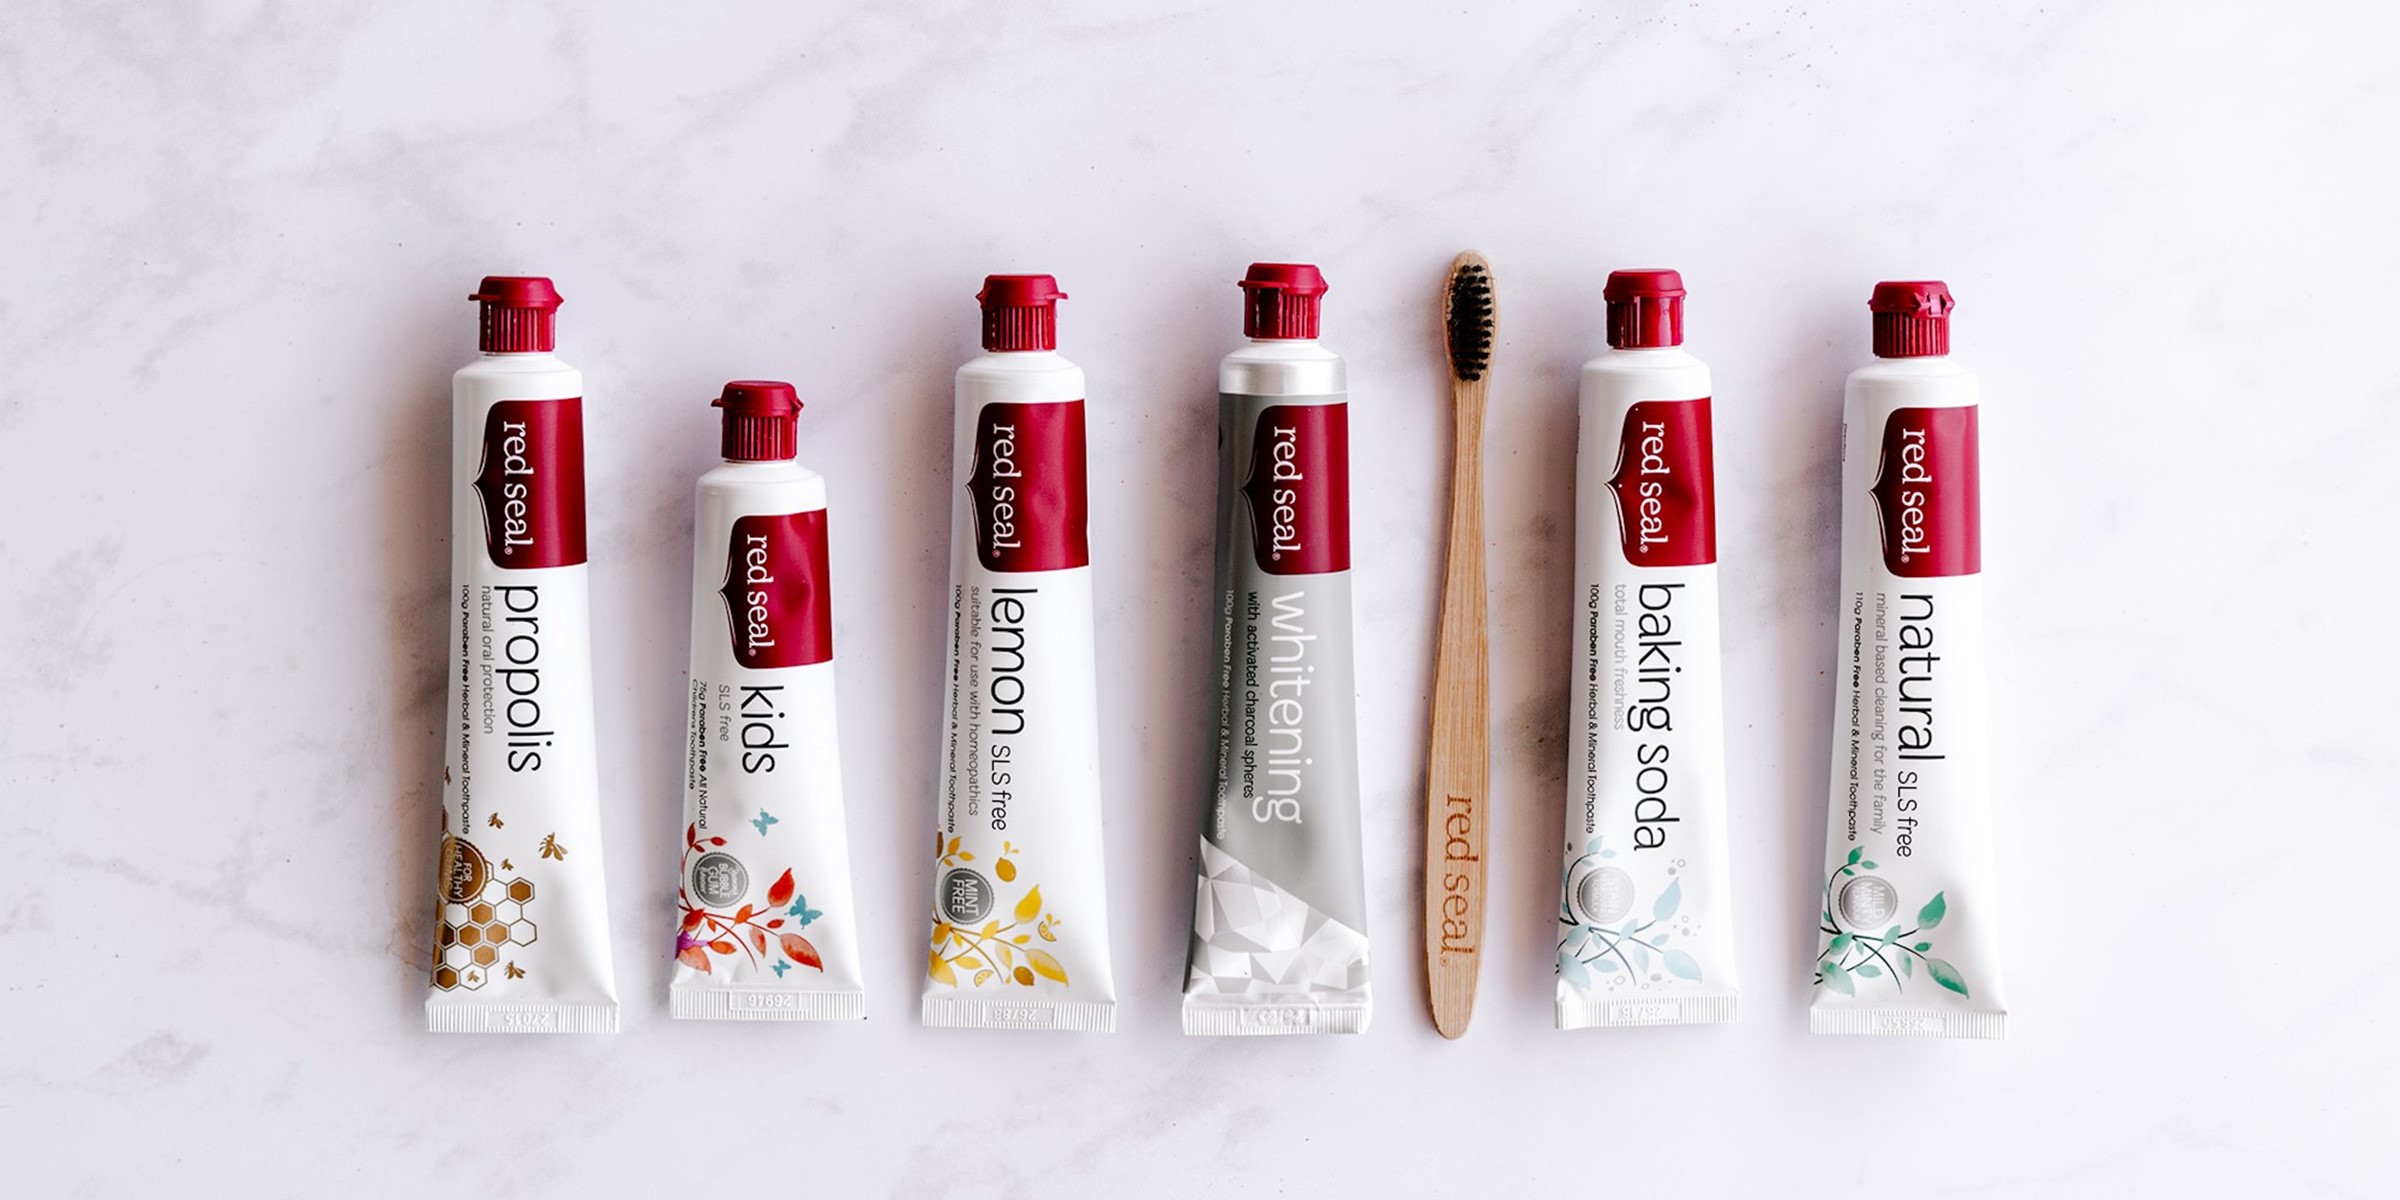 Red Seal Toothpaste Tubes